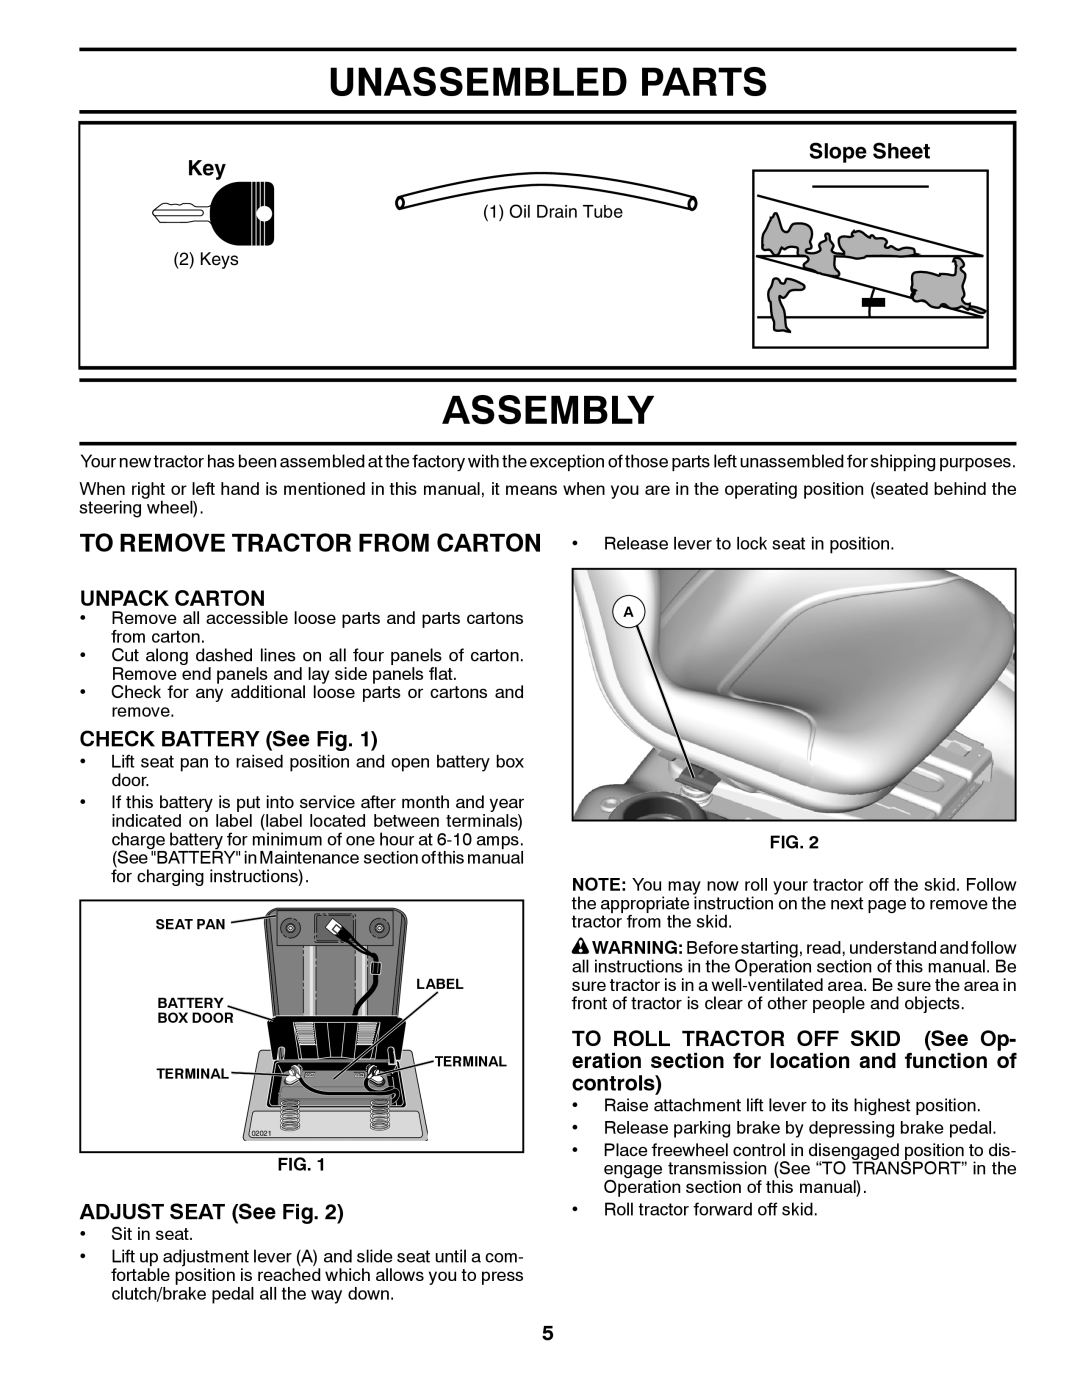 Husqvarna 2246LS owner manual Unassembled Parts, Assembly, To Remove Tractor From Carton, Slope Sheet Key, Unpack Carton 